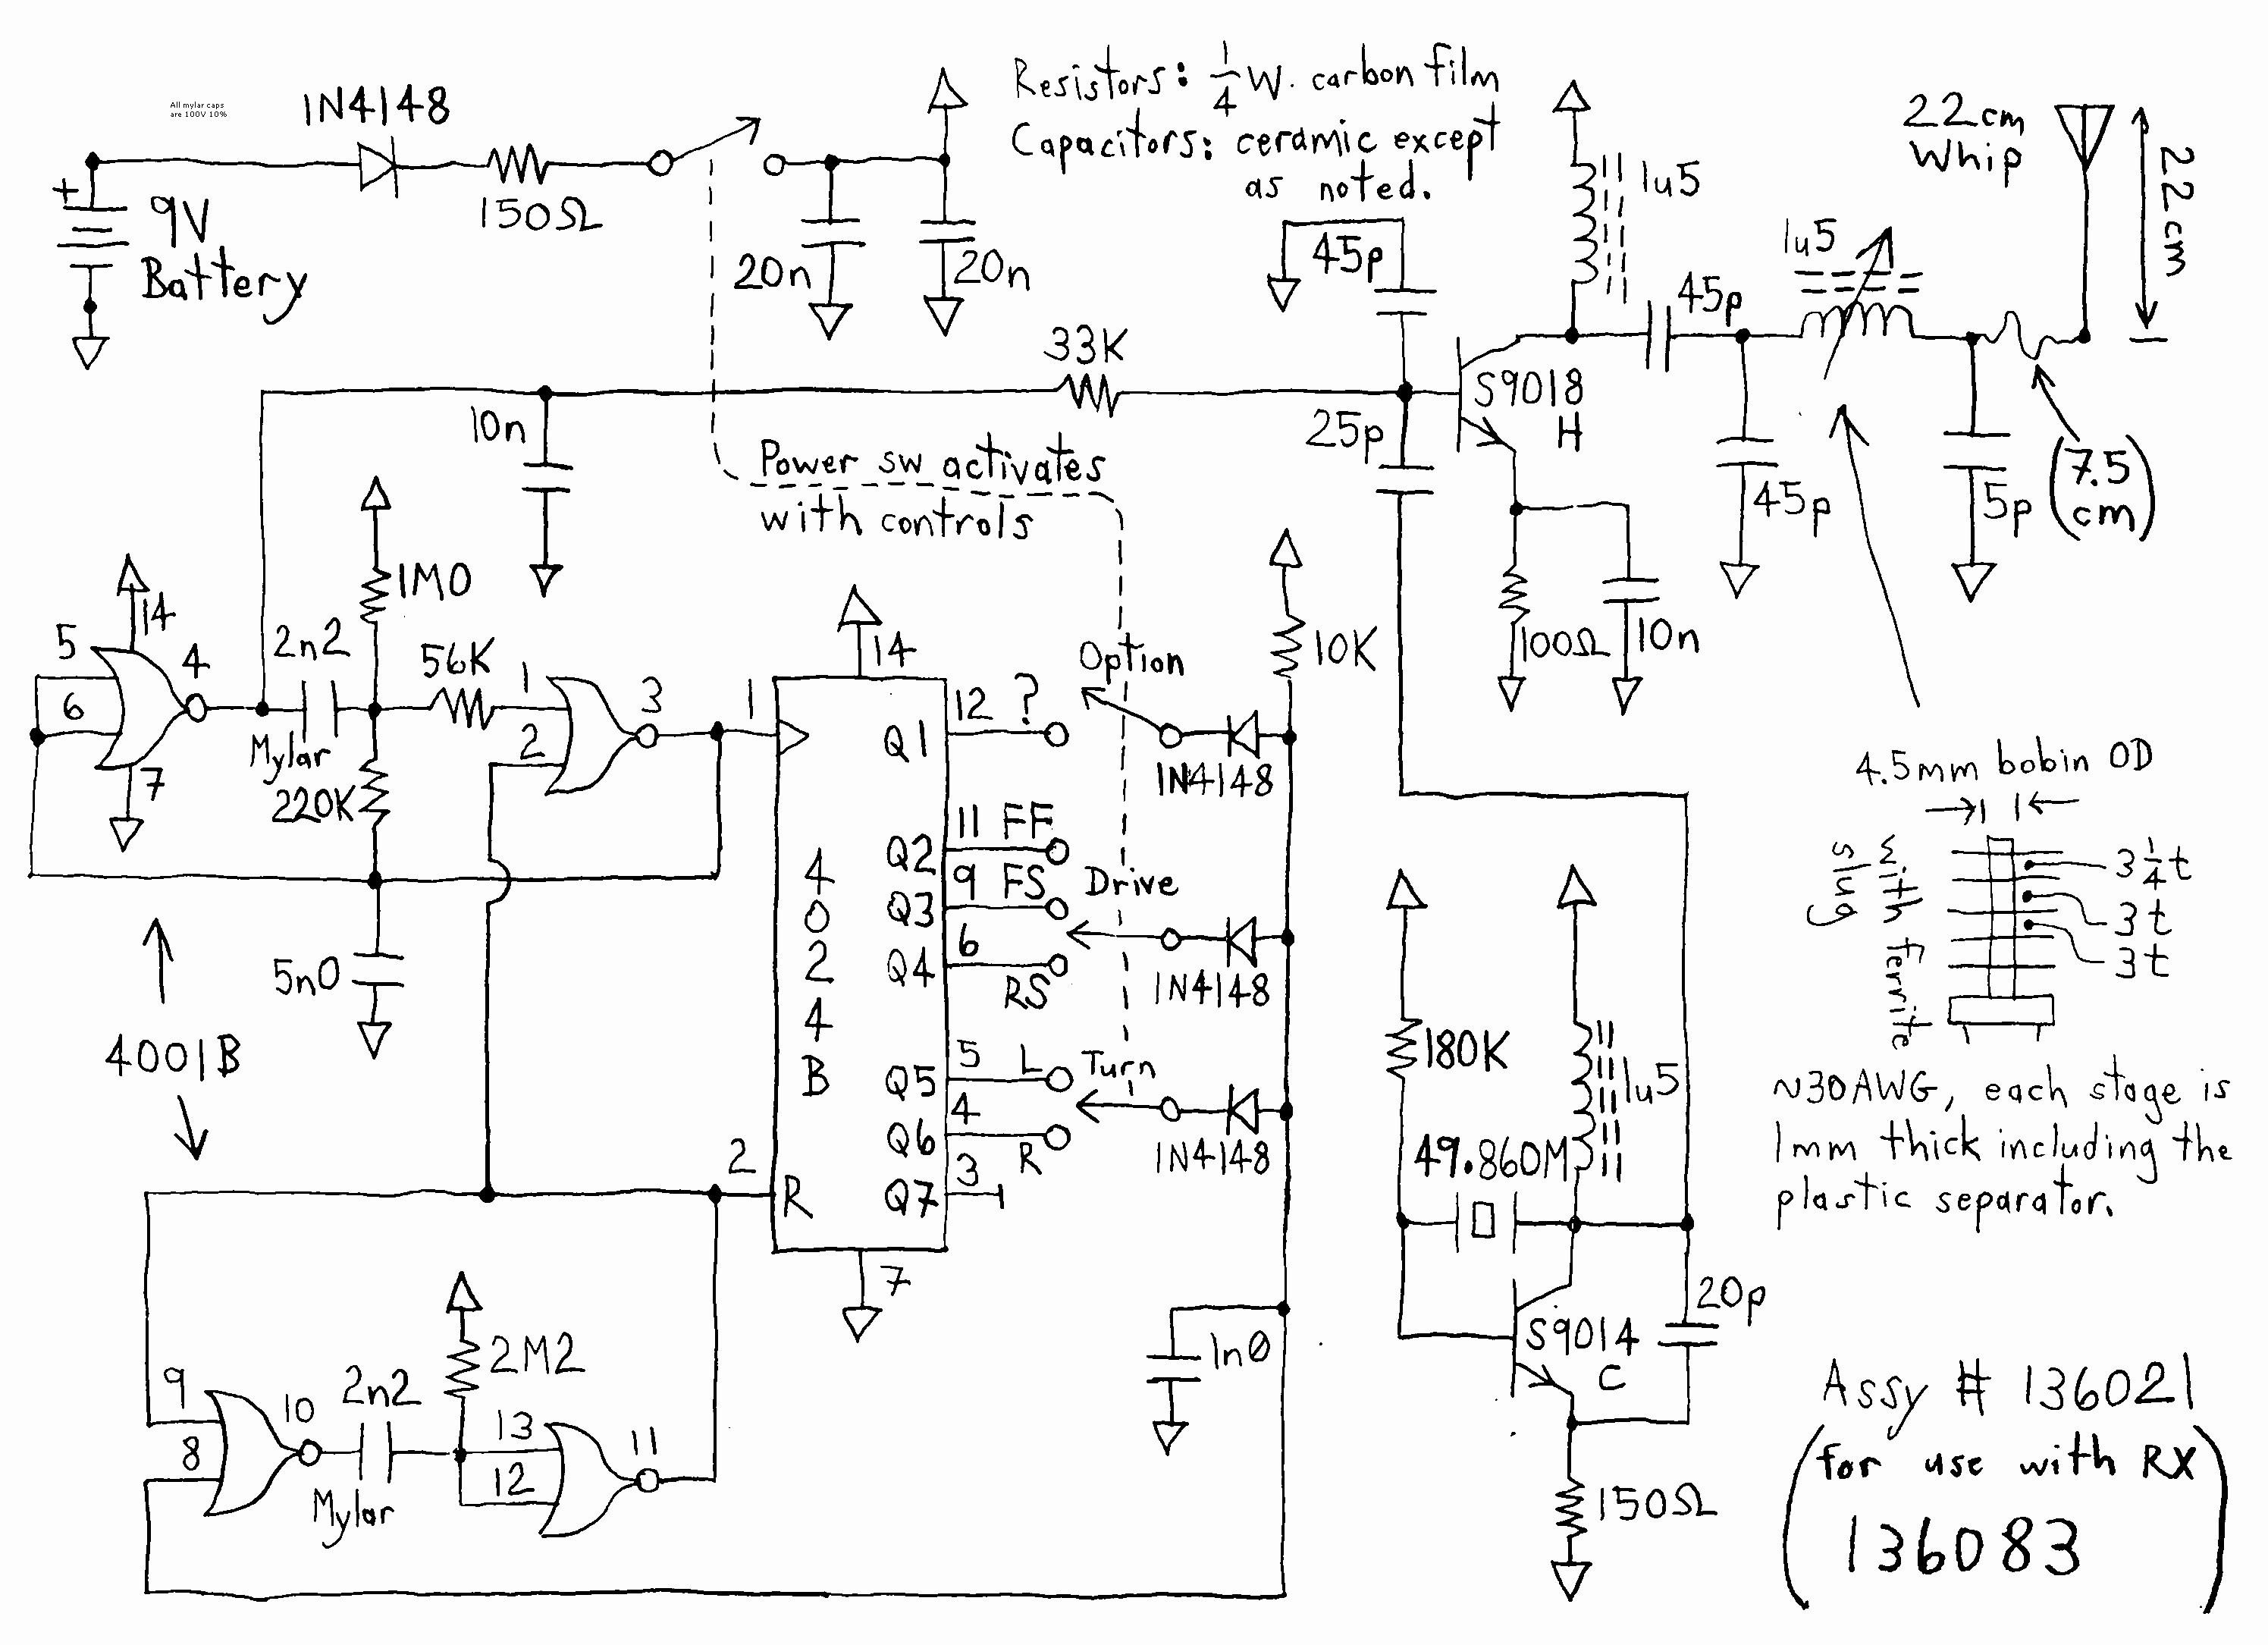 Old Fashioned Pioneer Avic D1 Wiring Diagram Image Collection Best Dish 500 Wiring Diagram Ideas Wiring Diagram Ideas blogitia